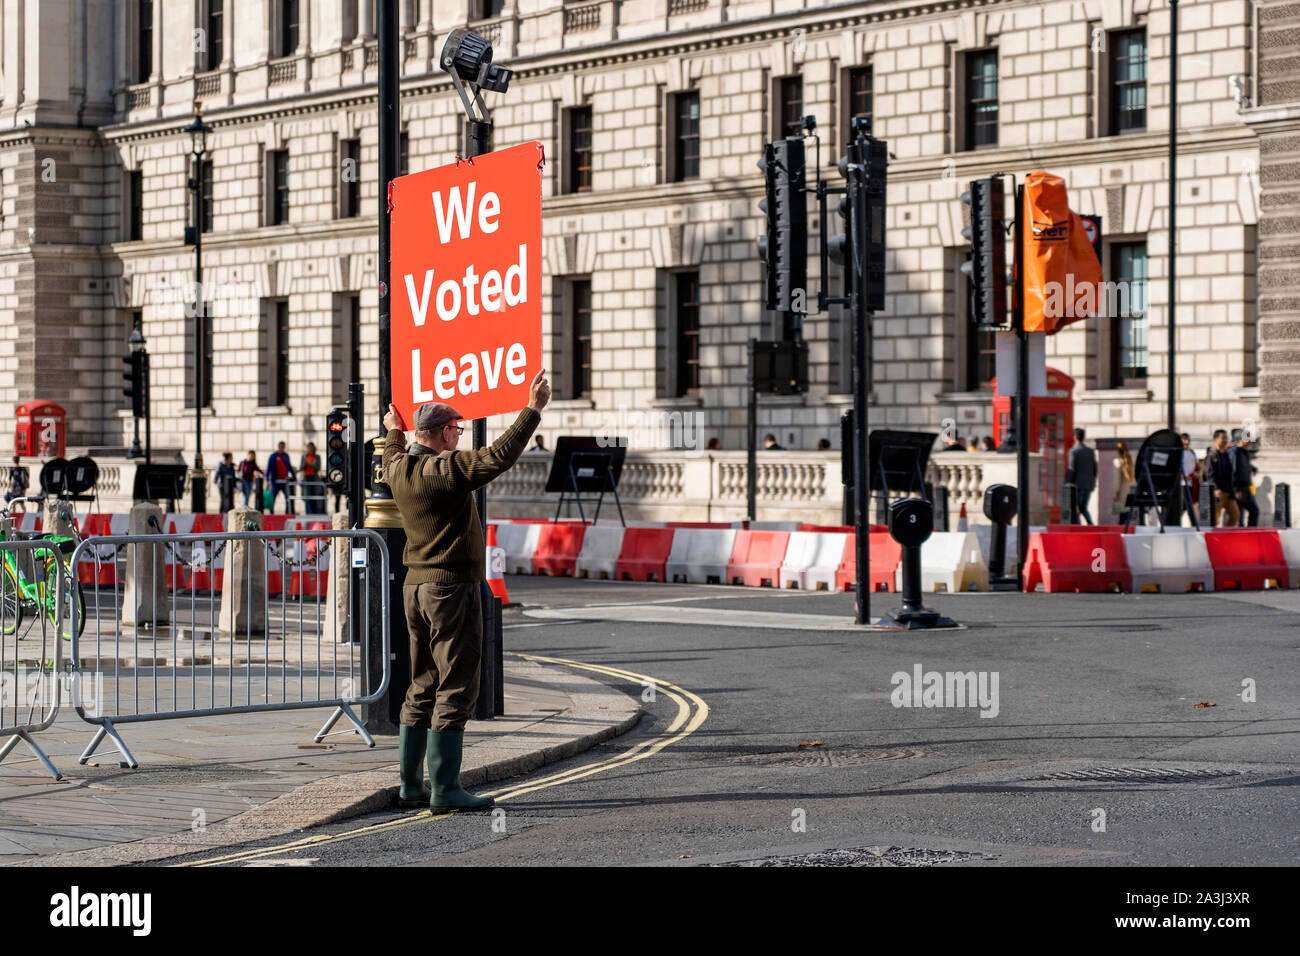 LONDON, UNITED KINGDOM - OCTOBER 1, 2019. Old Man is Holding the Red Banner on the Parliament Square - We Voted Leave. Stock Photo